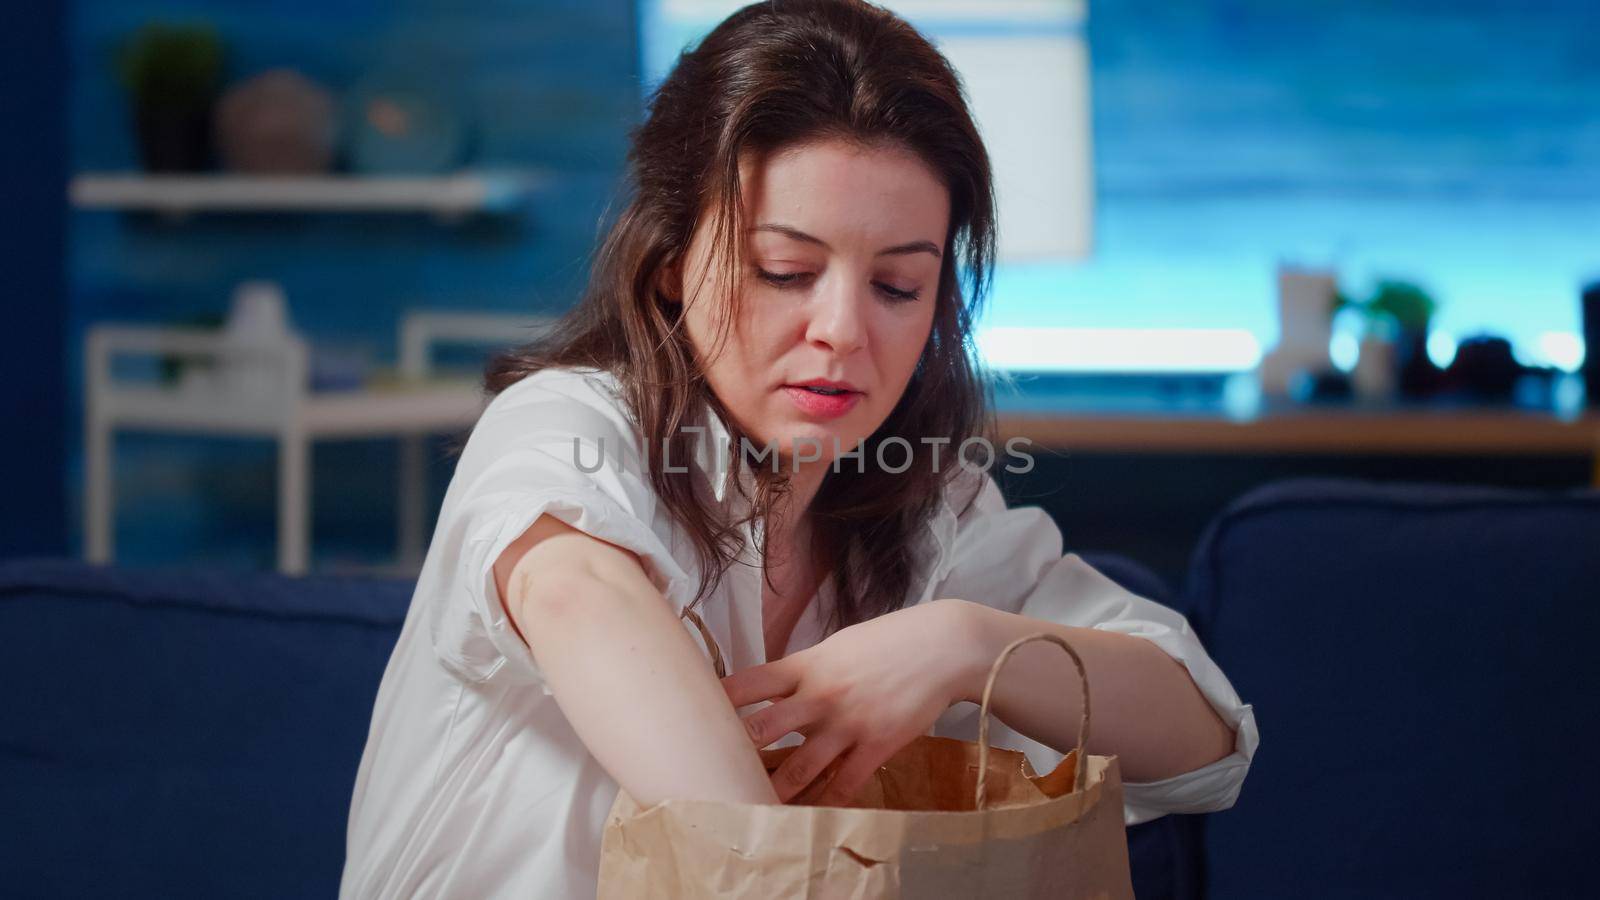 Close up of hungry person unpacking fast food meal from delivery bag on table in living room. Caucasian woman preparing takeaway food and boxes for eating dinner at home after work